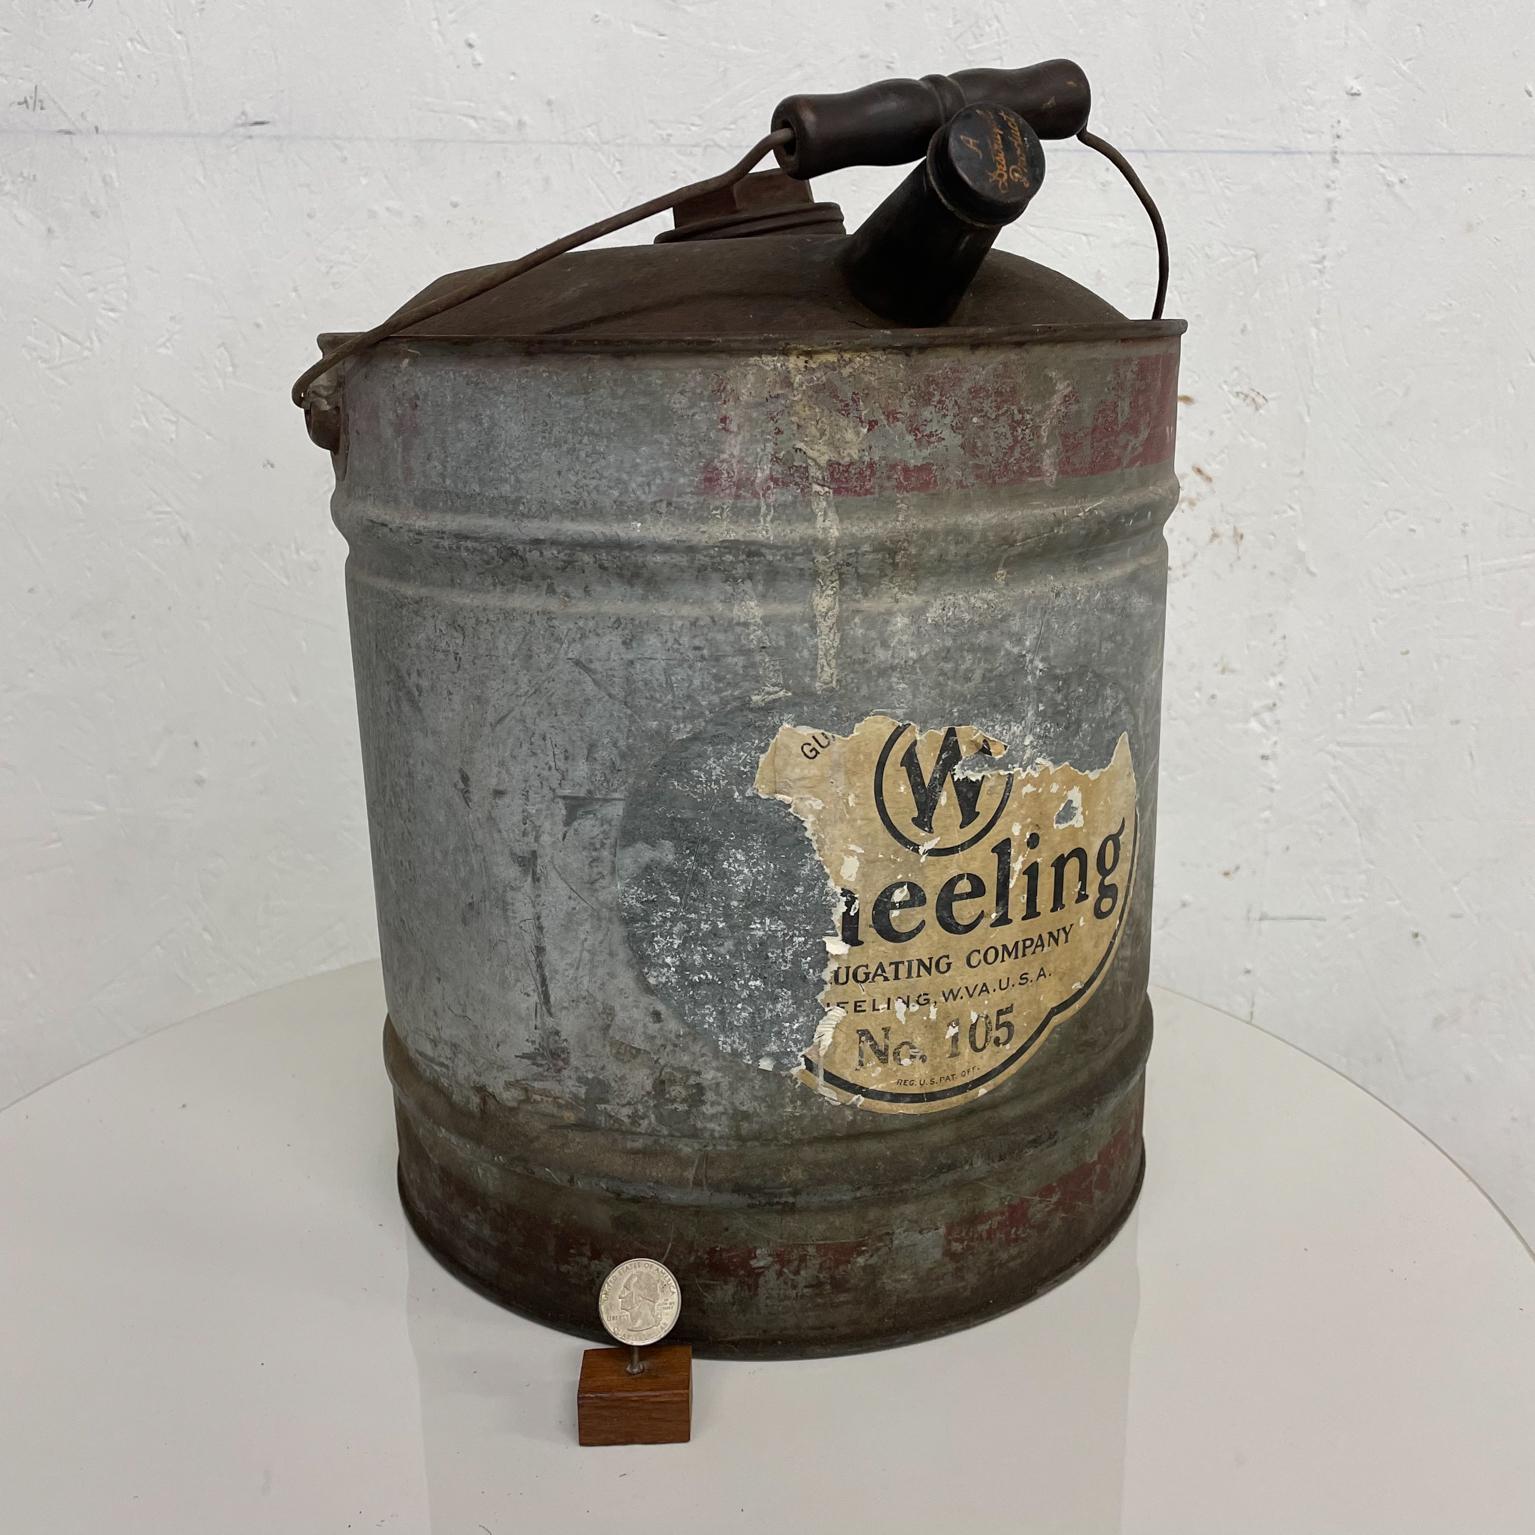 Steel Pour Can
Antique Galvanized steel metal can Funnel spout carry handle 
Historical Wheeling Corrugating Co Wheeling WVA
Measures: 17 tall (top of handle), 14.5 tall x 12 diameter
Galvanized steel vintage can-container with lid and funnel